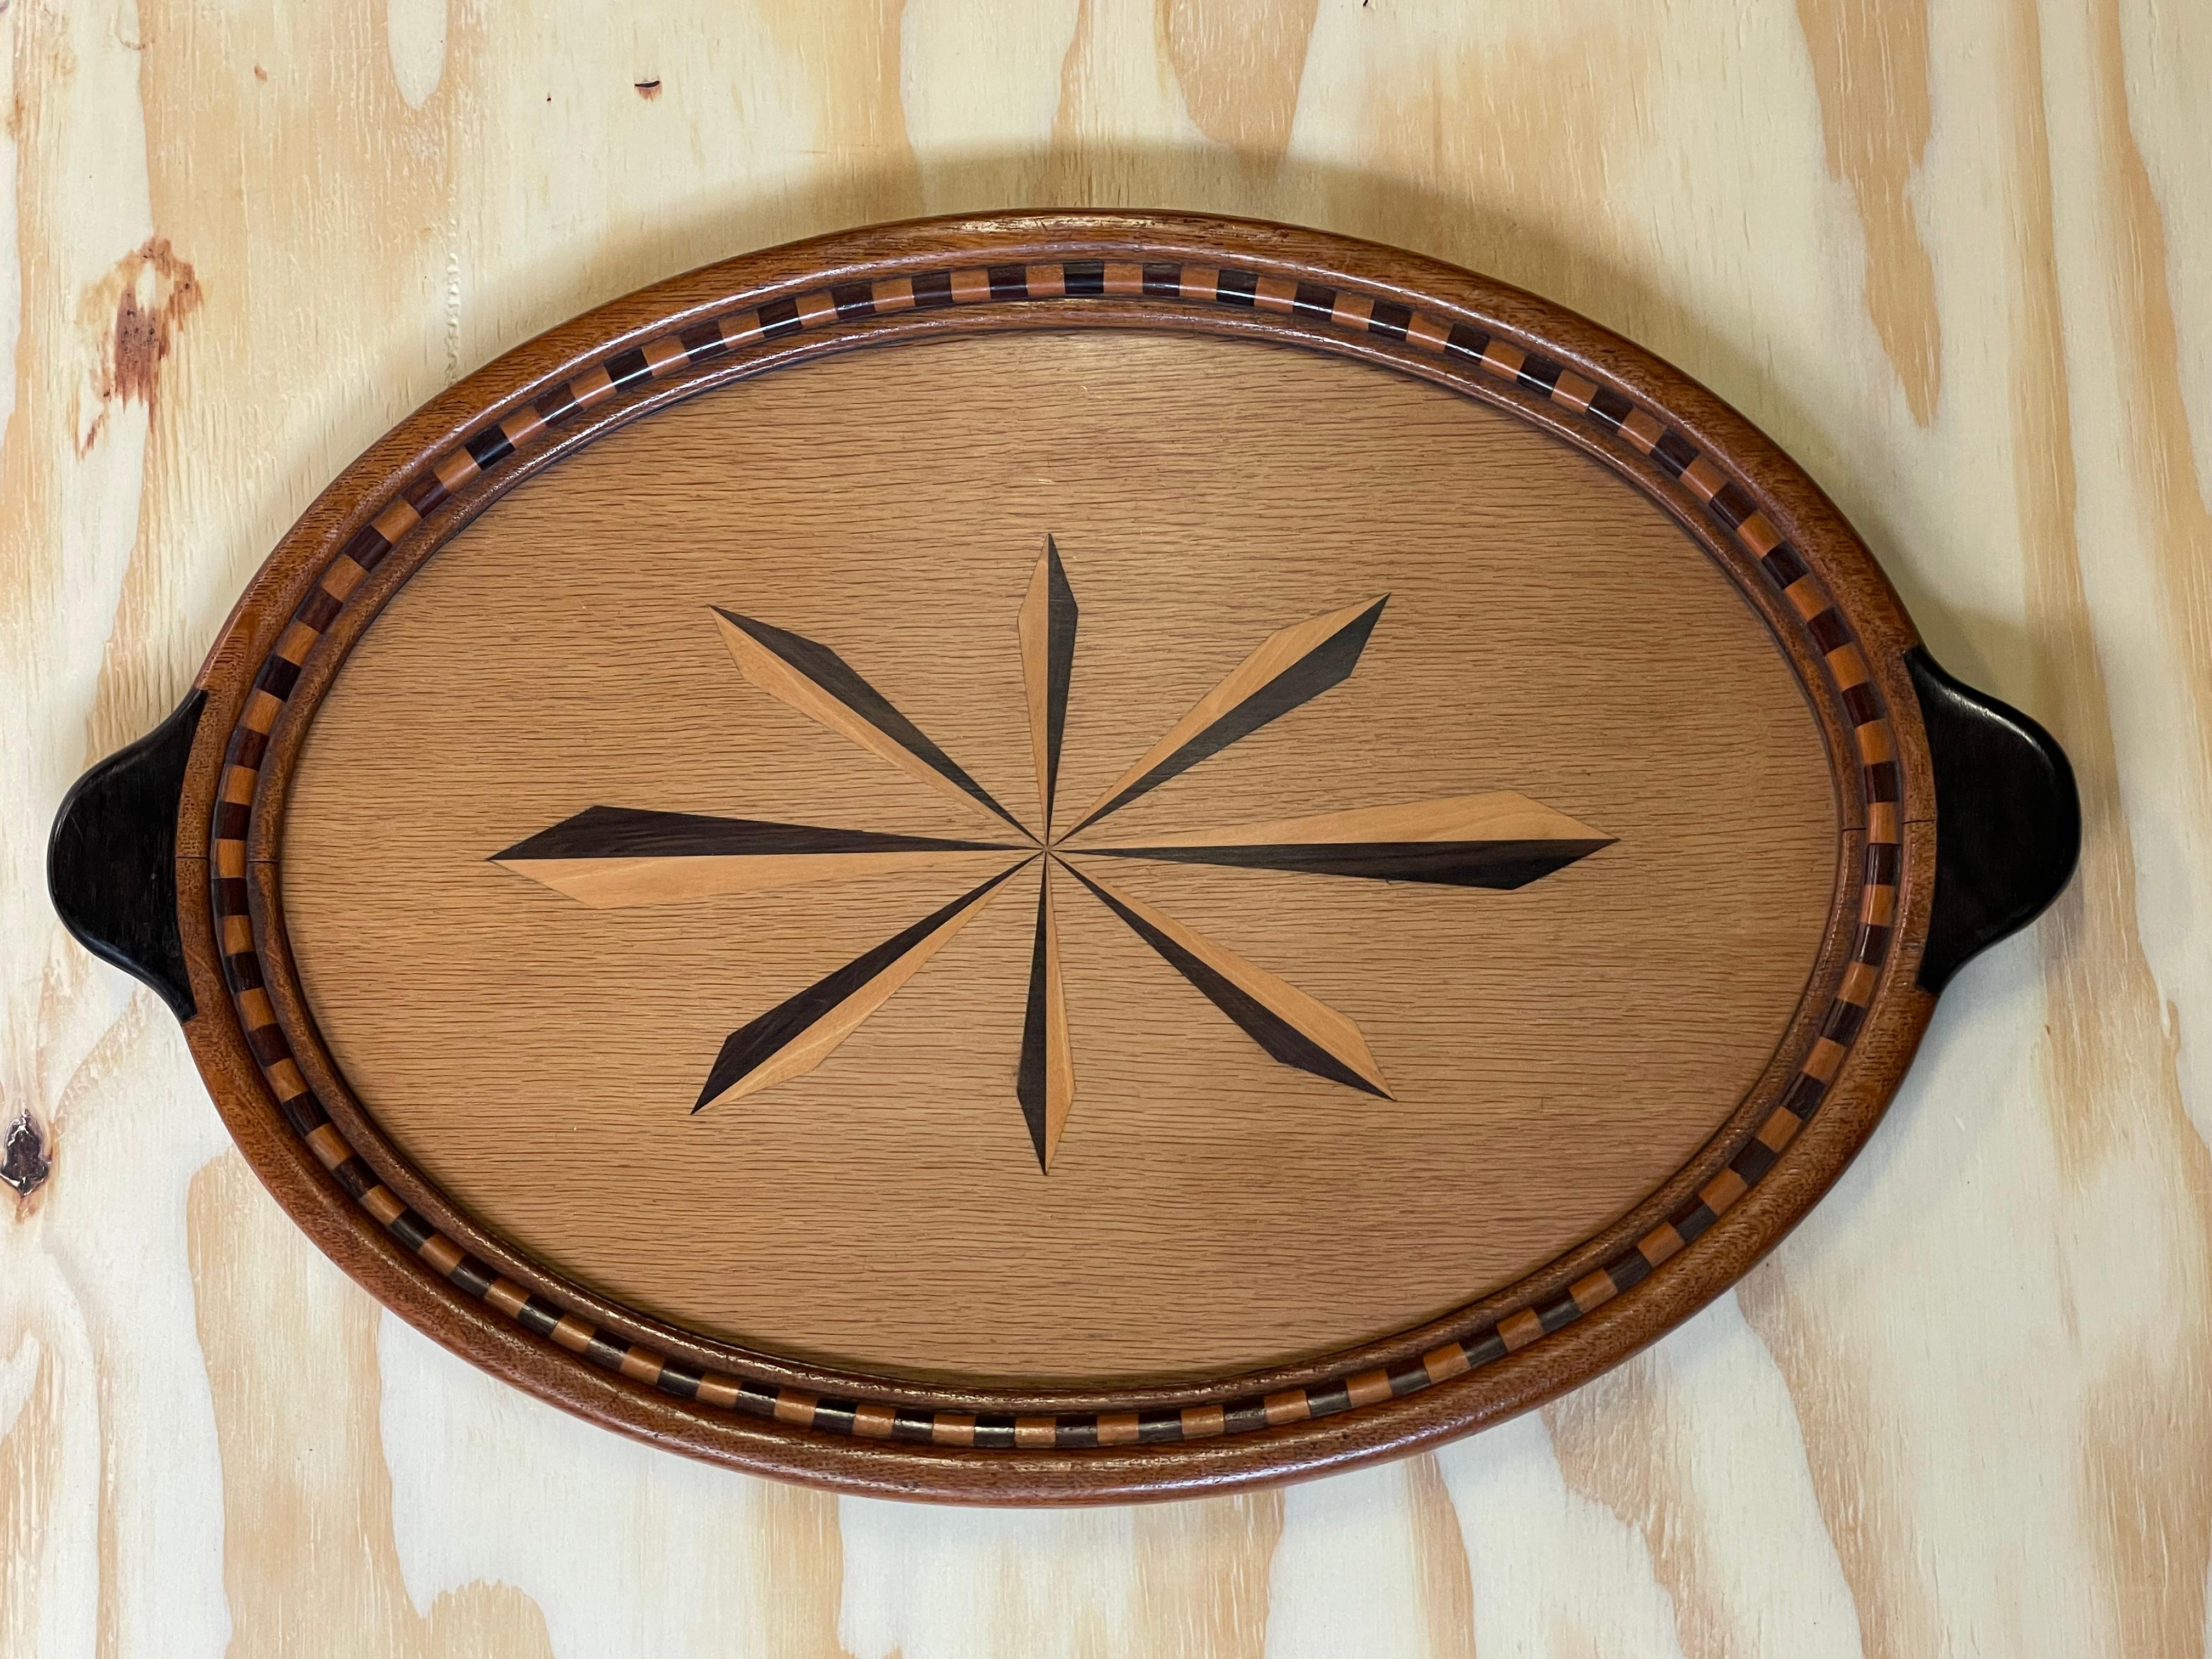 Practical and best condition antique serving tray with inlaid compass rose.

If you are looking for a beautiful, decorative and superb quality antique serving tray then this fine example could be flying your way soon. This best-condition-ever